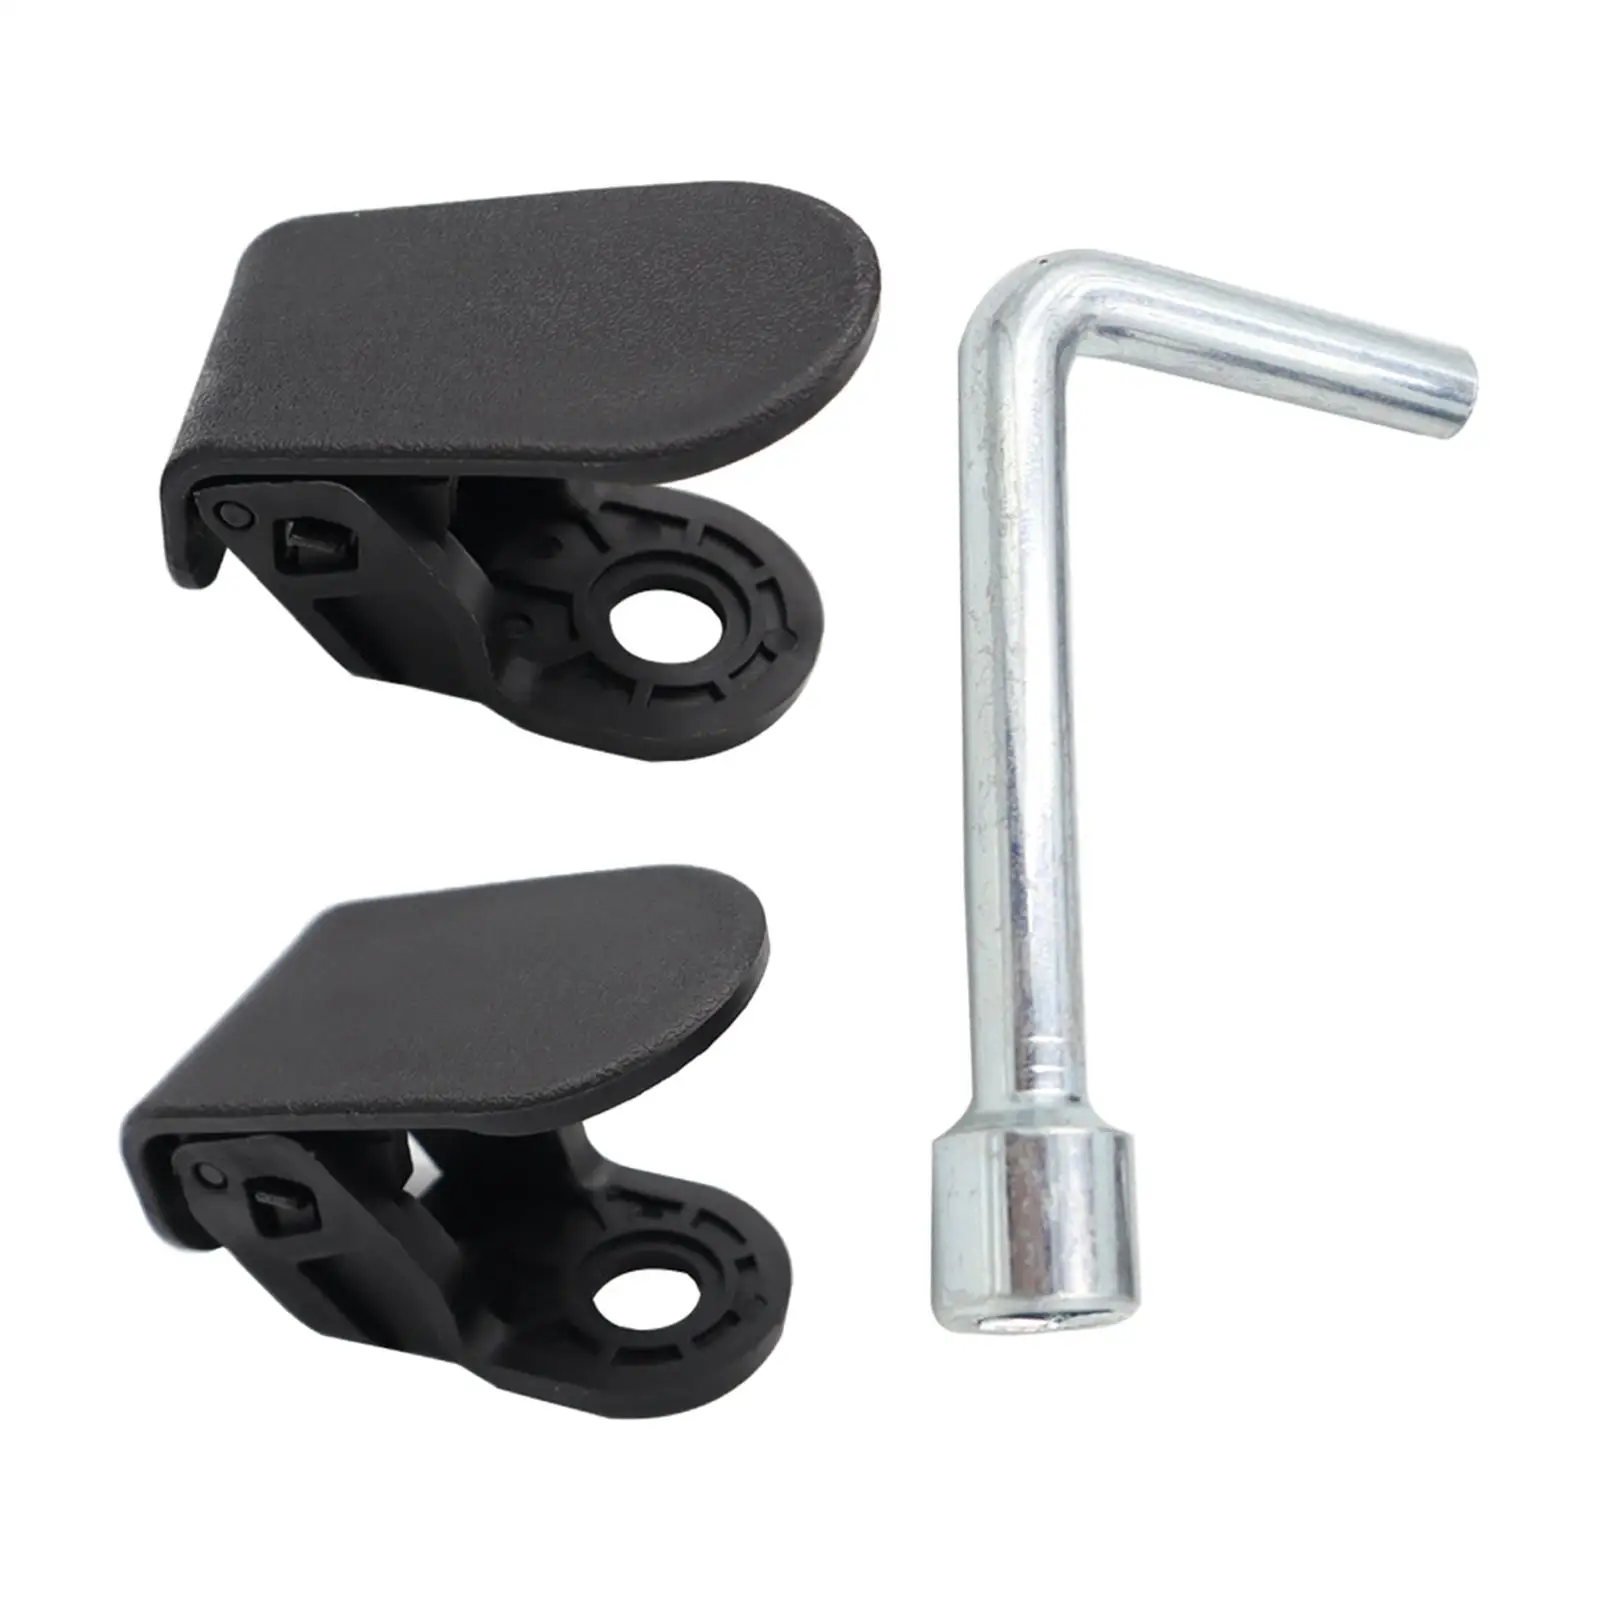 2 Pieces Car Front Trunk Hooks Concealed Clip Bolt Covers for Tesla Model 3 19-20 High Performance Car Interior Accessories